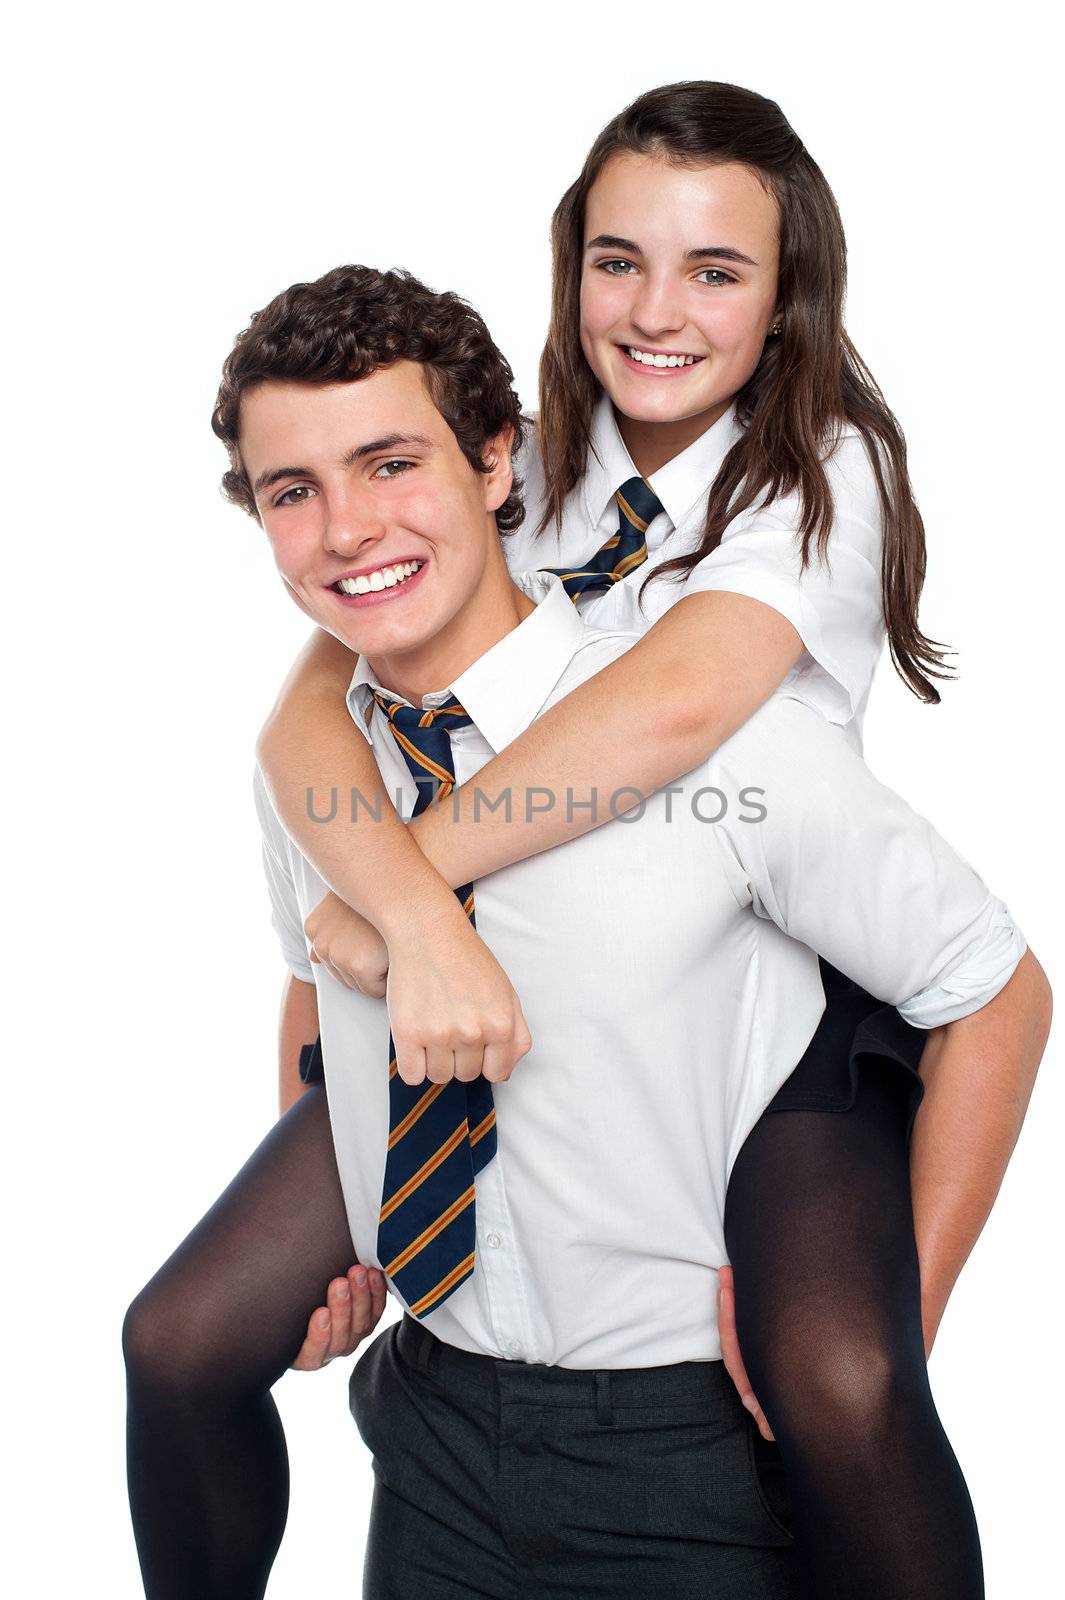 Cheerful shot of youngster riding piggyback by stockyimages